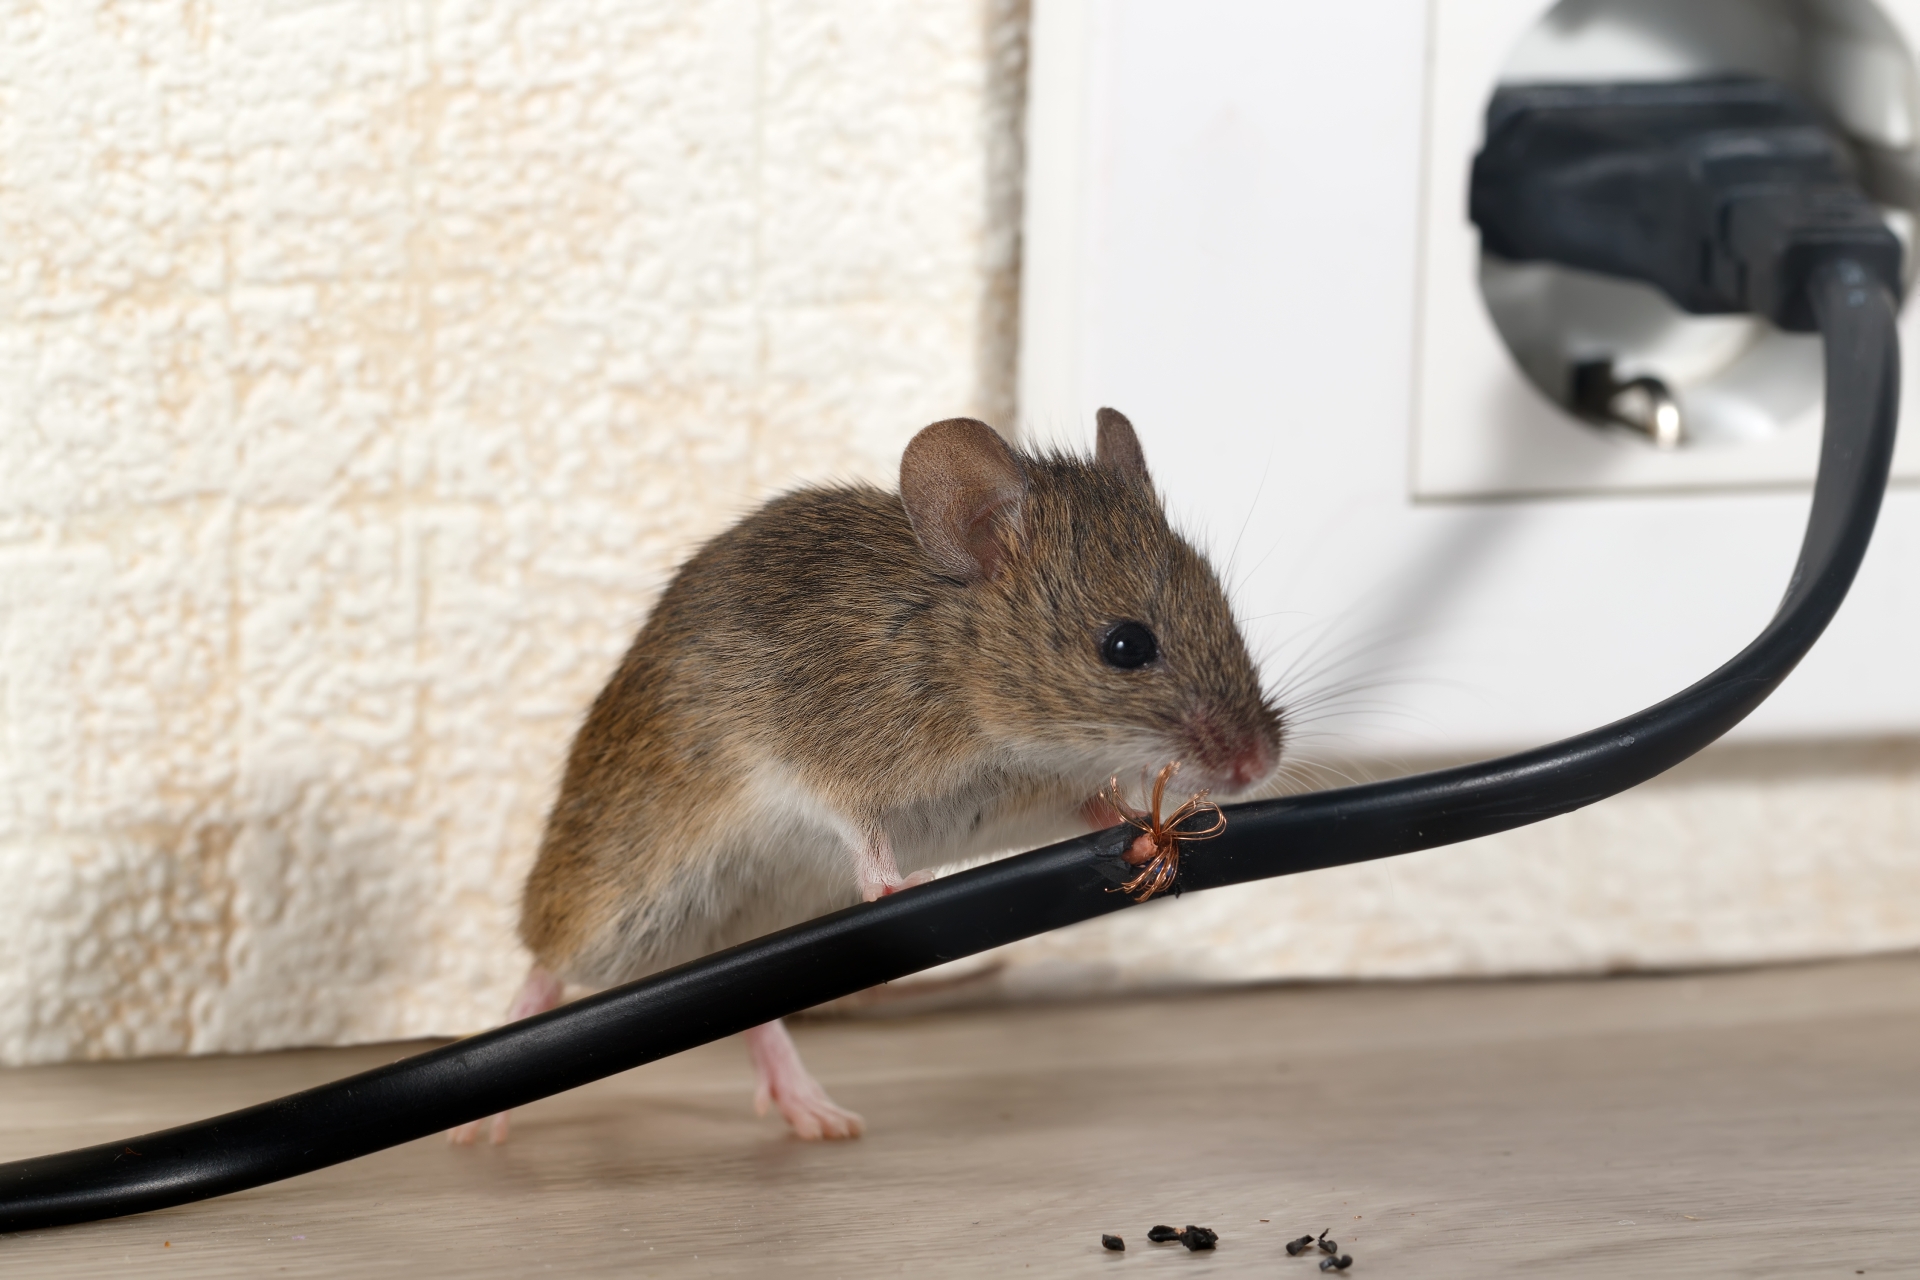 Mice Infestation, Pest Control in Lewisham, SE13. Call Now 020 8166 9746